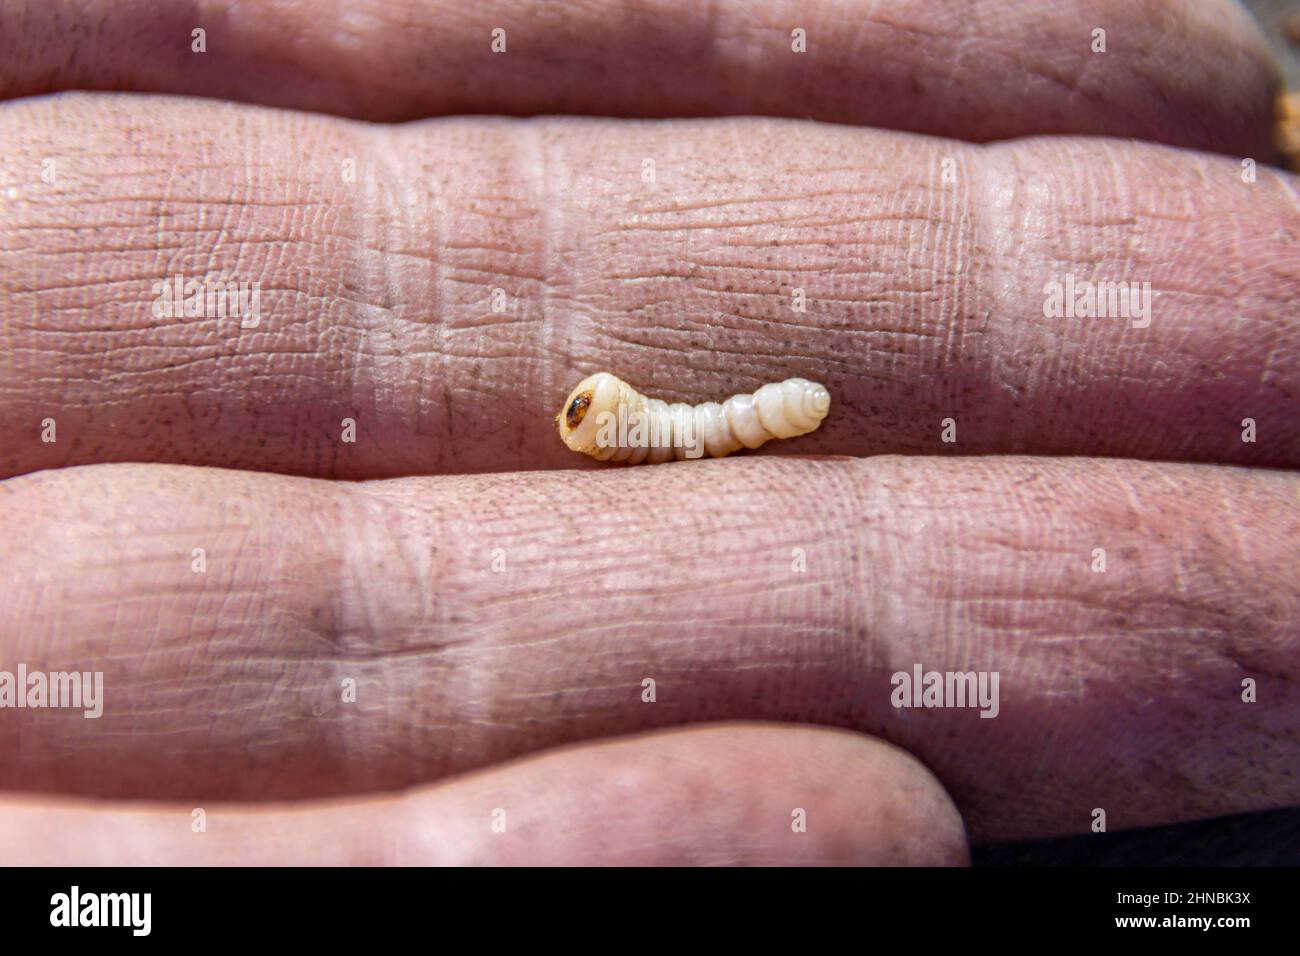 white beetle larva intended for bait when fishing, selective focus Stock Photo